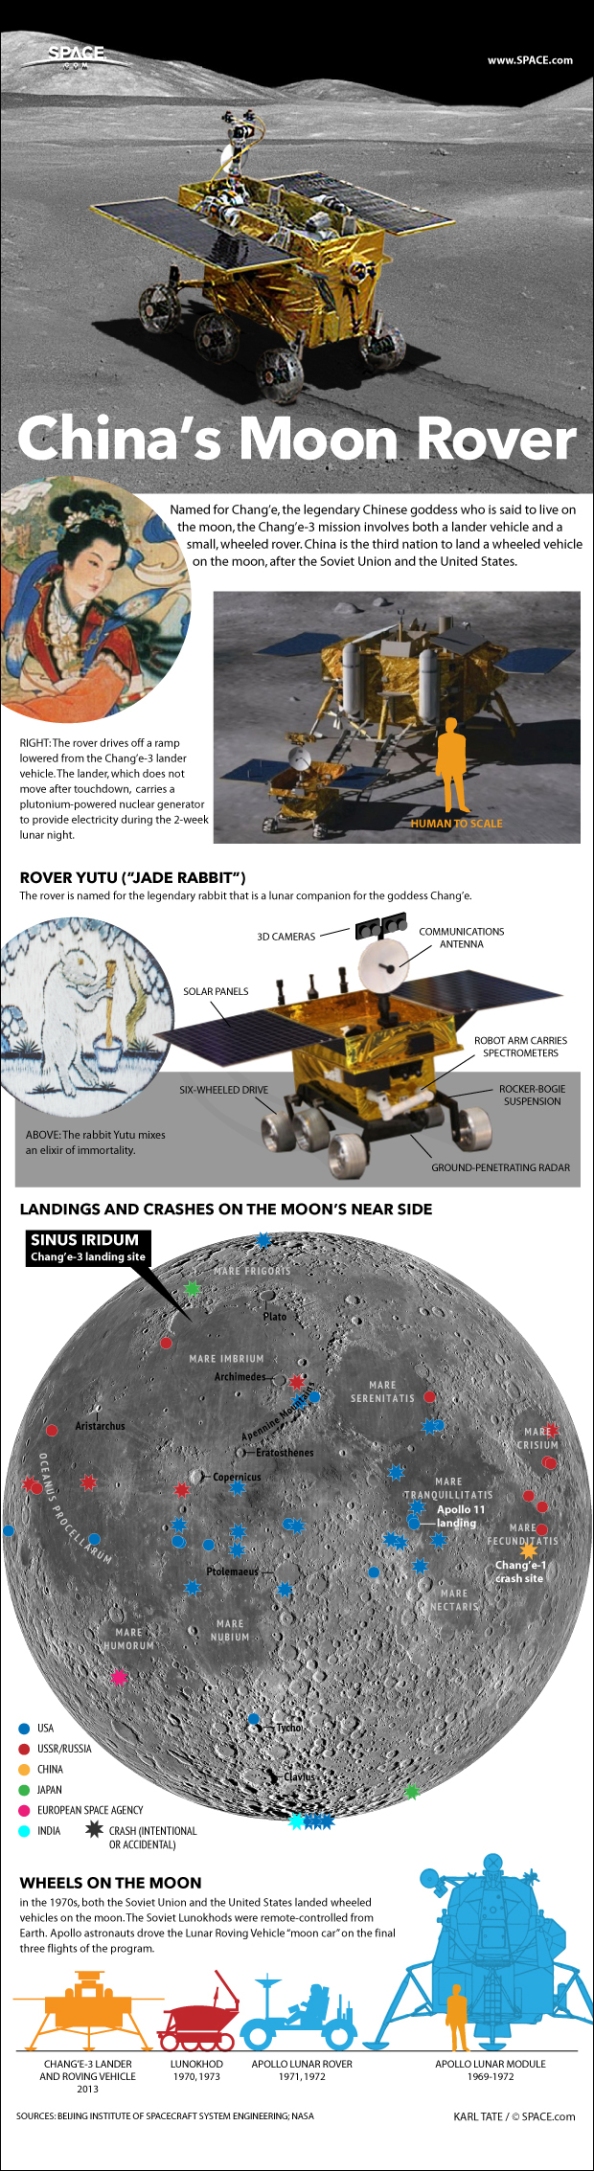 china-change3-moon-rover-131205c-02-EMBED